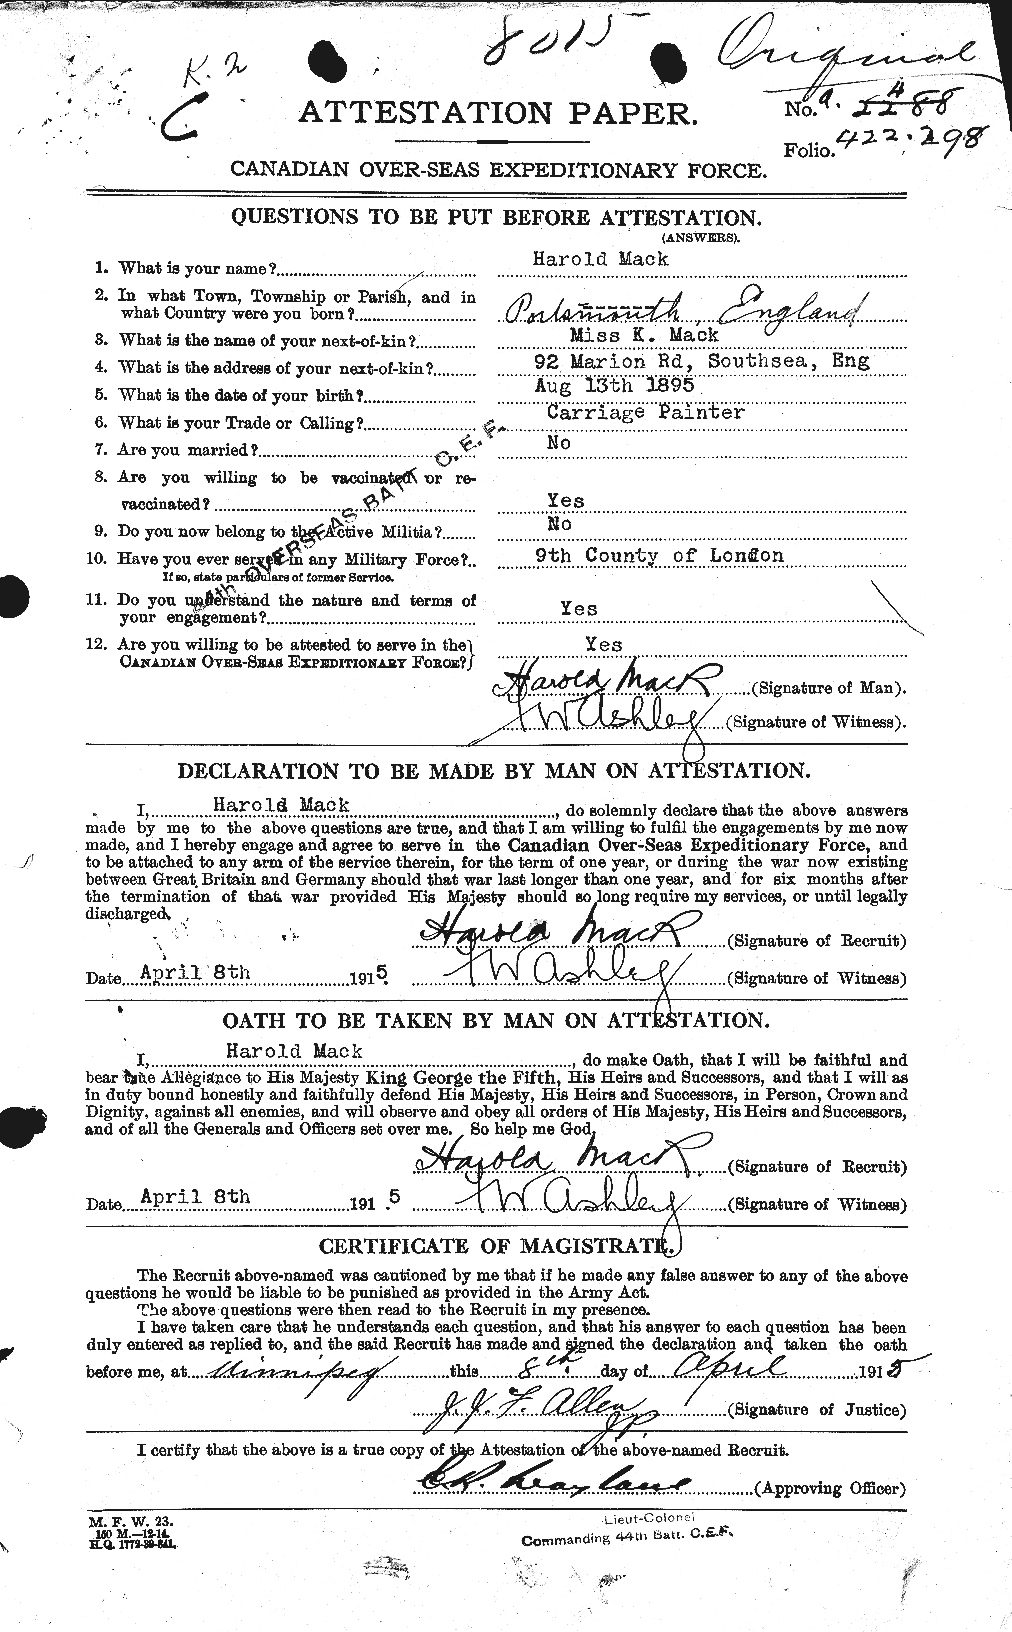 Personnel Records of the First World War - CEF 476144a